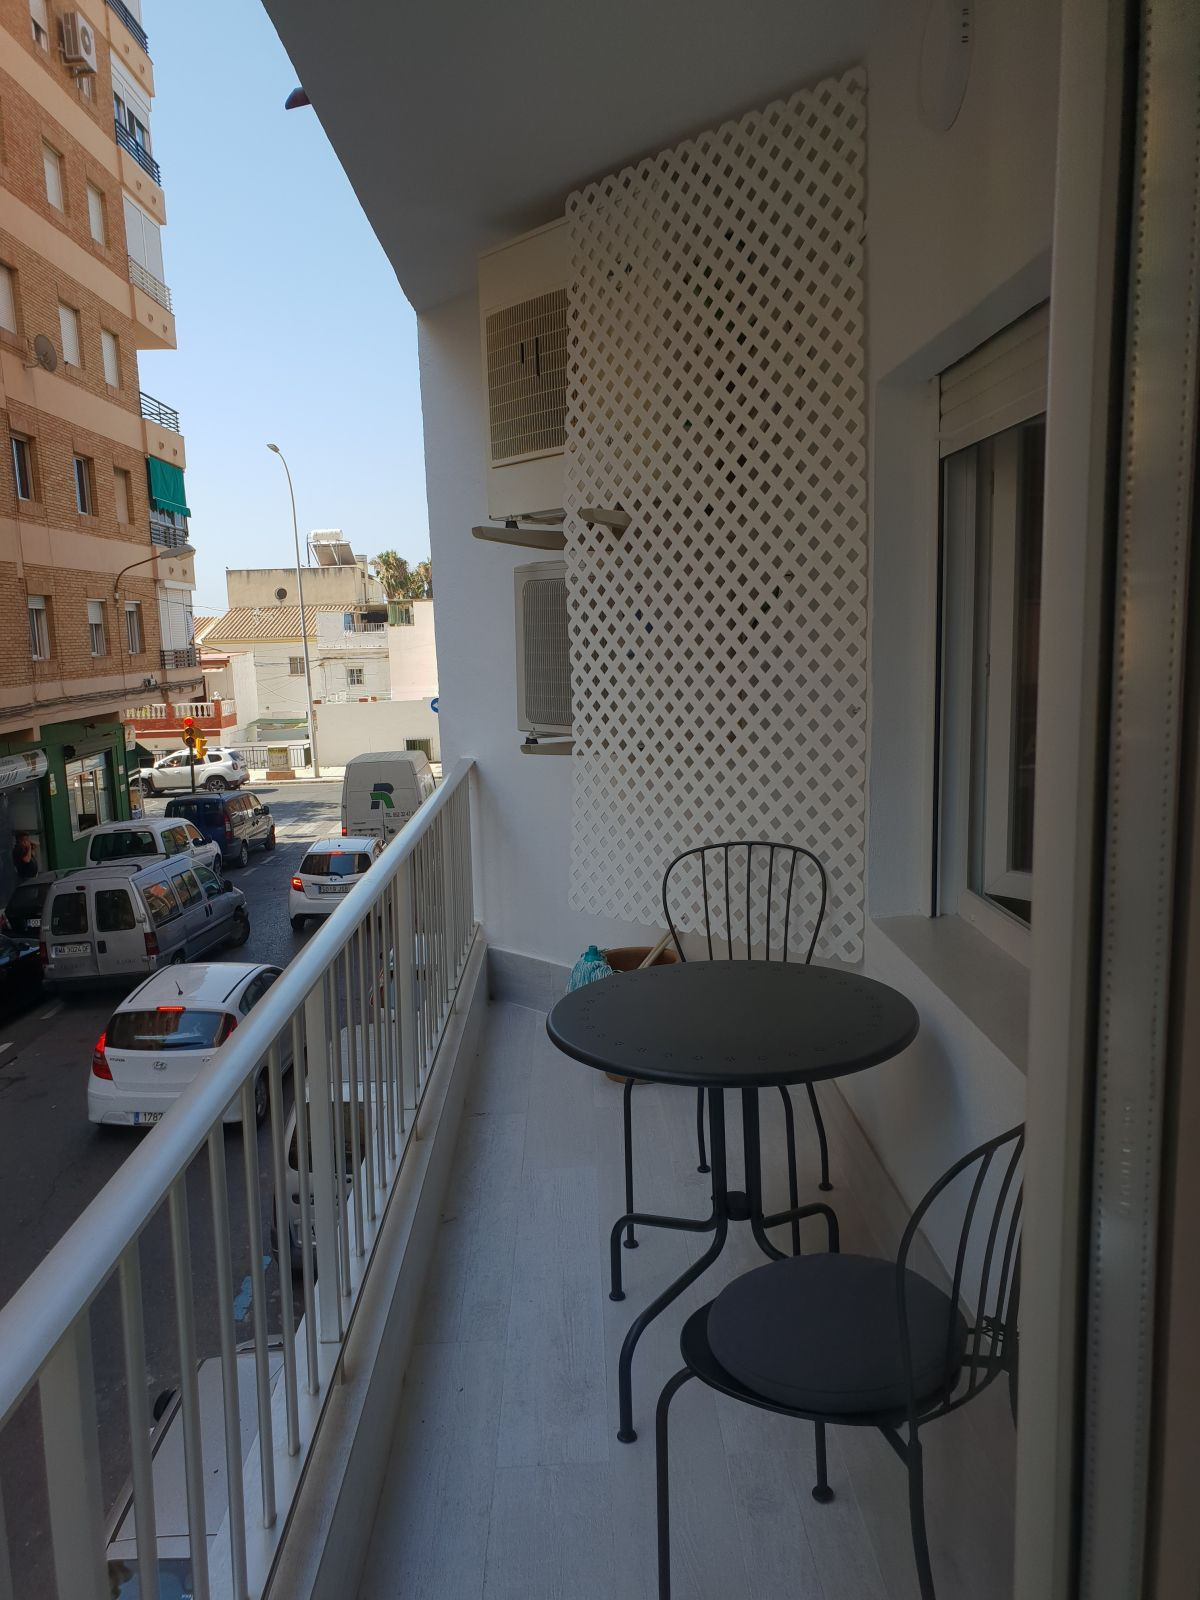 Middle Floor Apartment, Malaga East less 100m from the beach, Costa del Sol.
4 Bedrooms, 2 Bathrooms, Spain